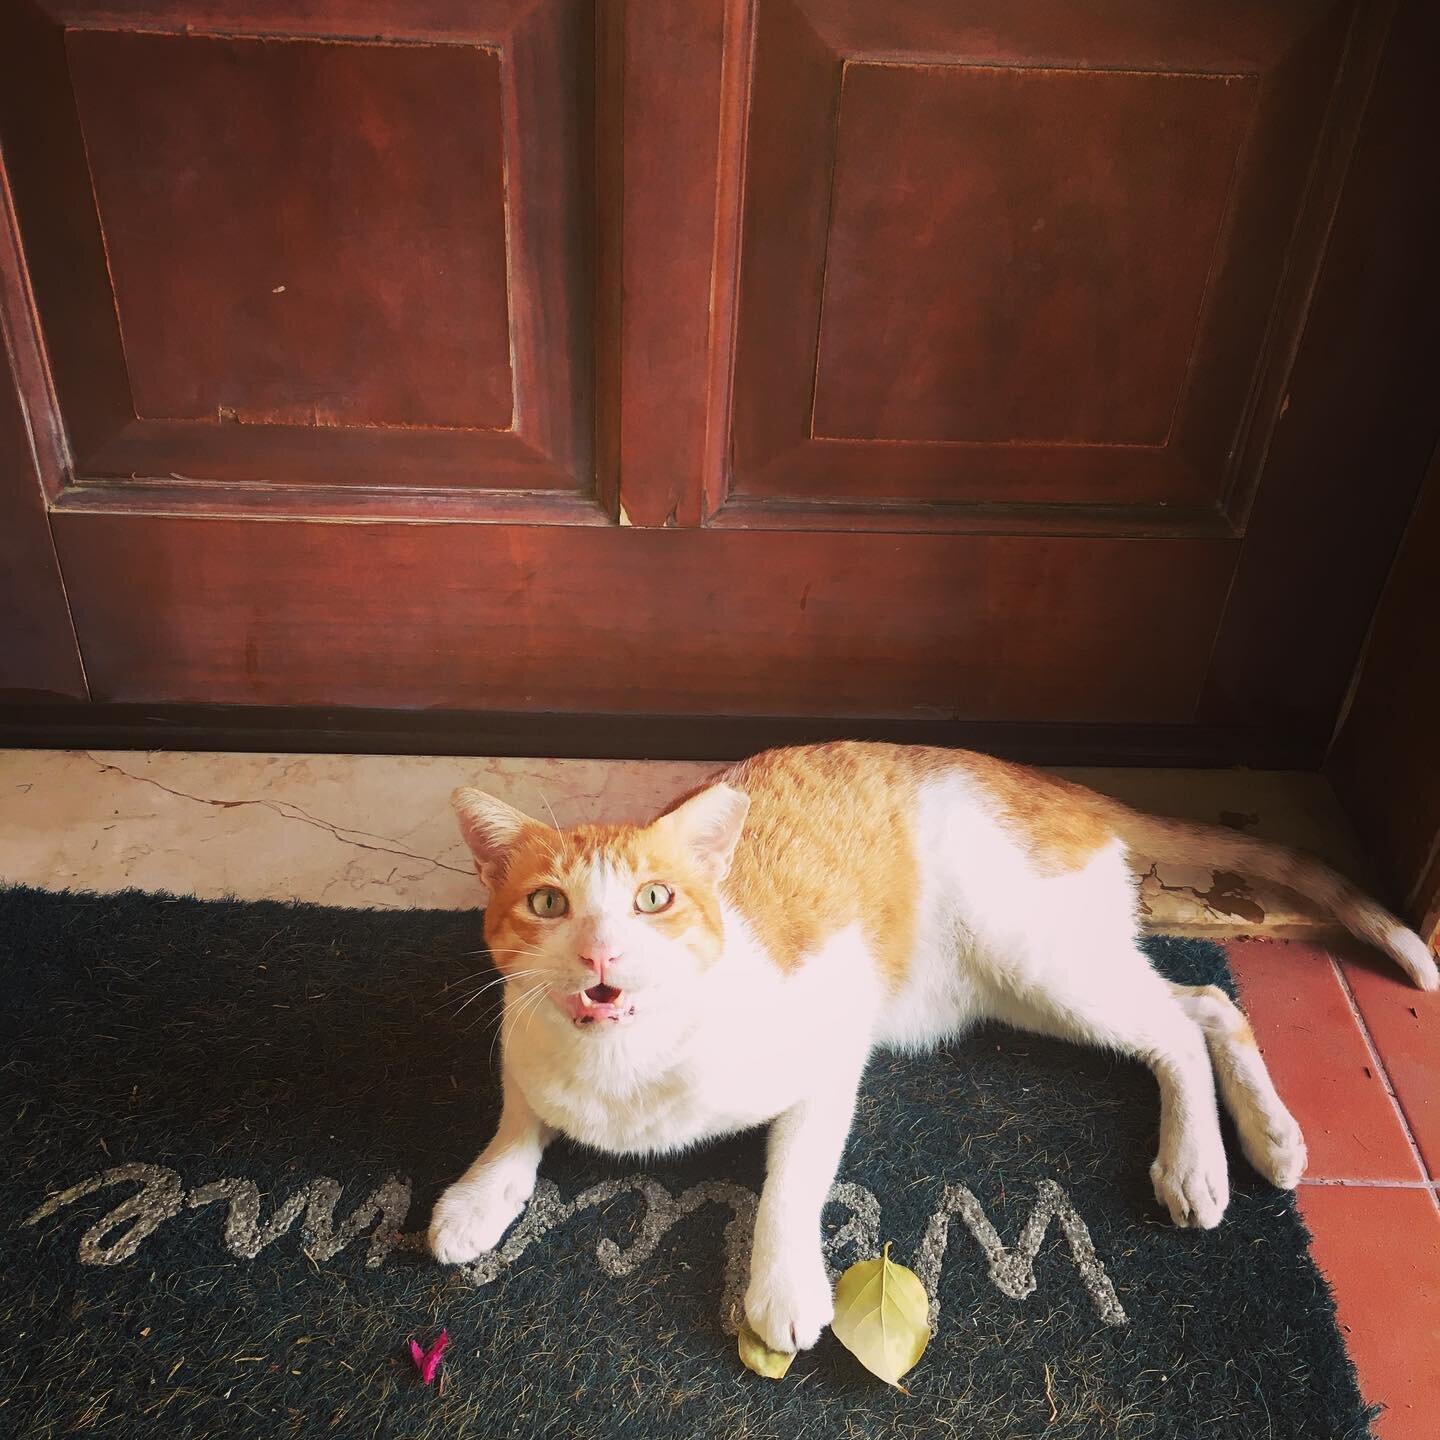 Our favourite kind of Welcome 🐈 #gingercat #gingercatsofinstagram #welcome #hellokitty